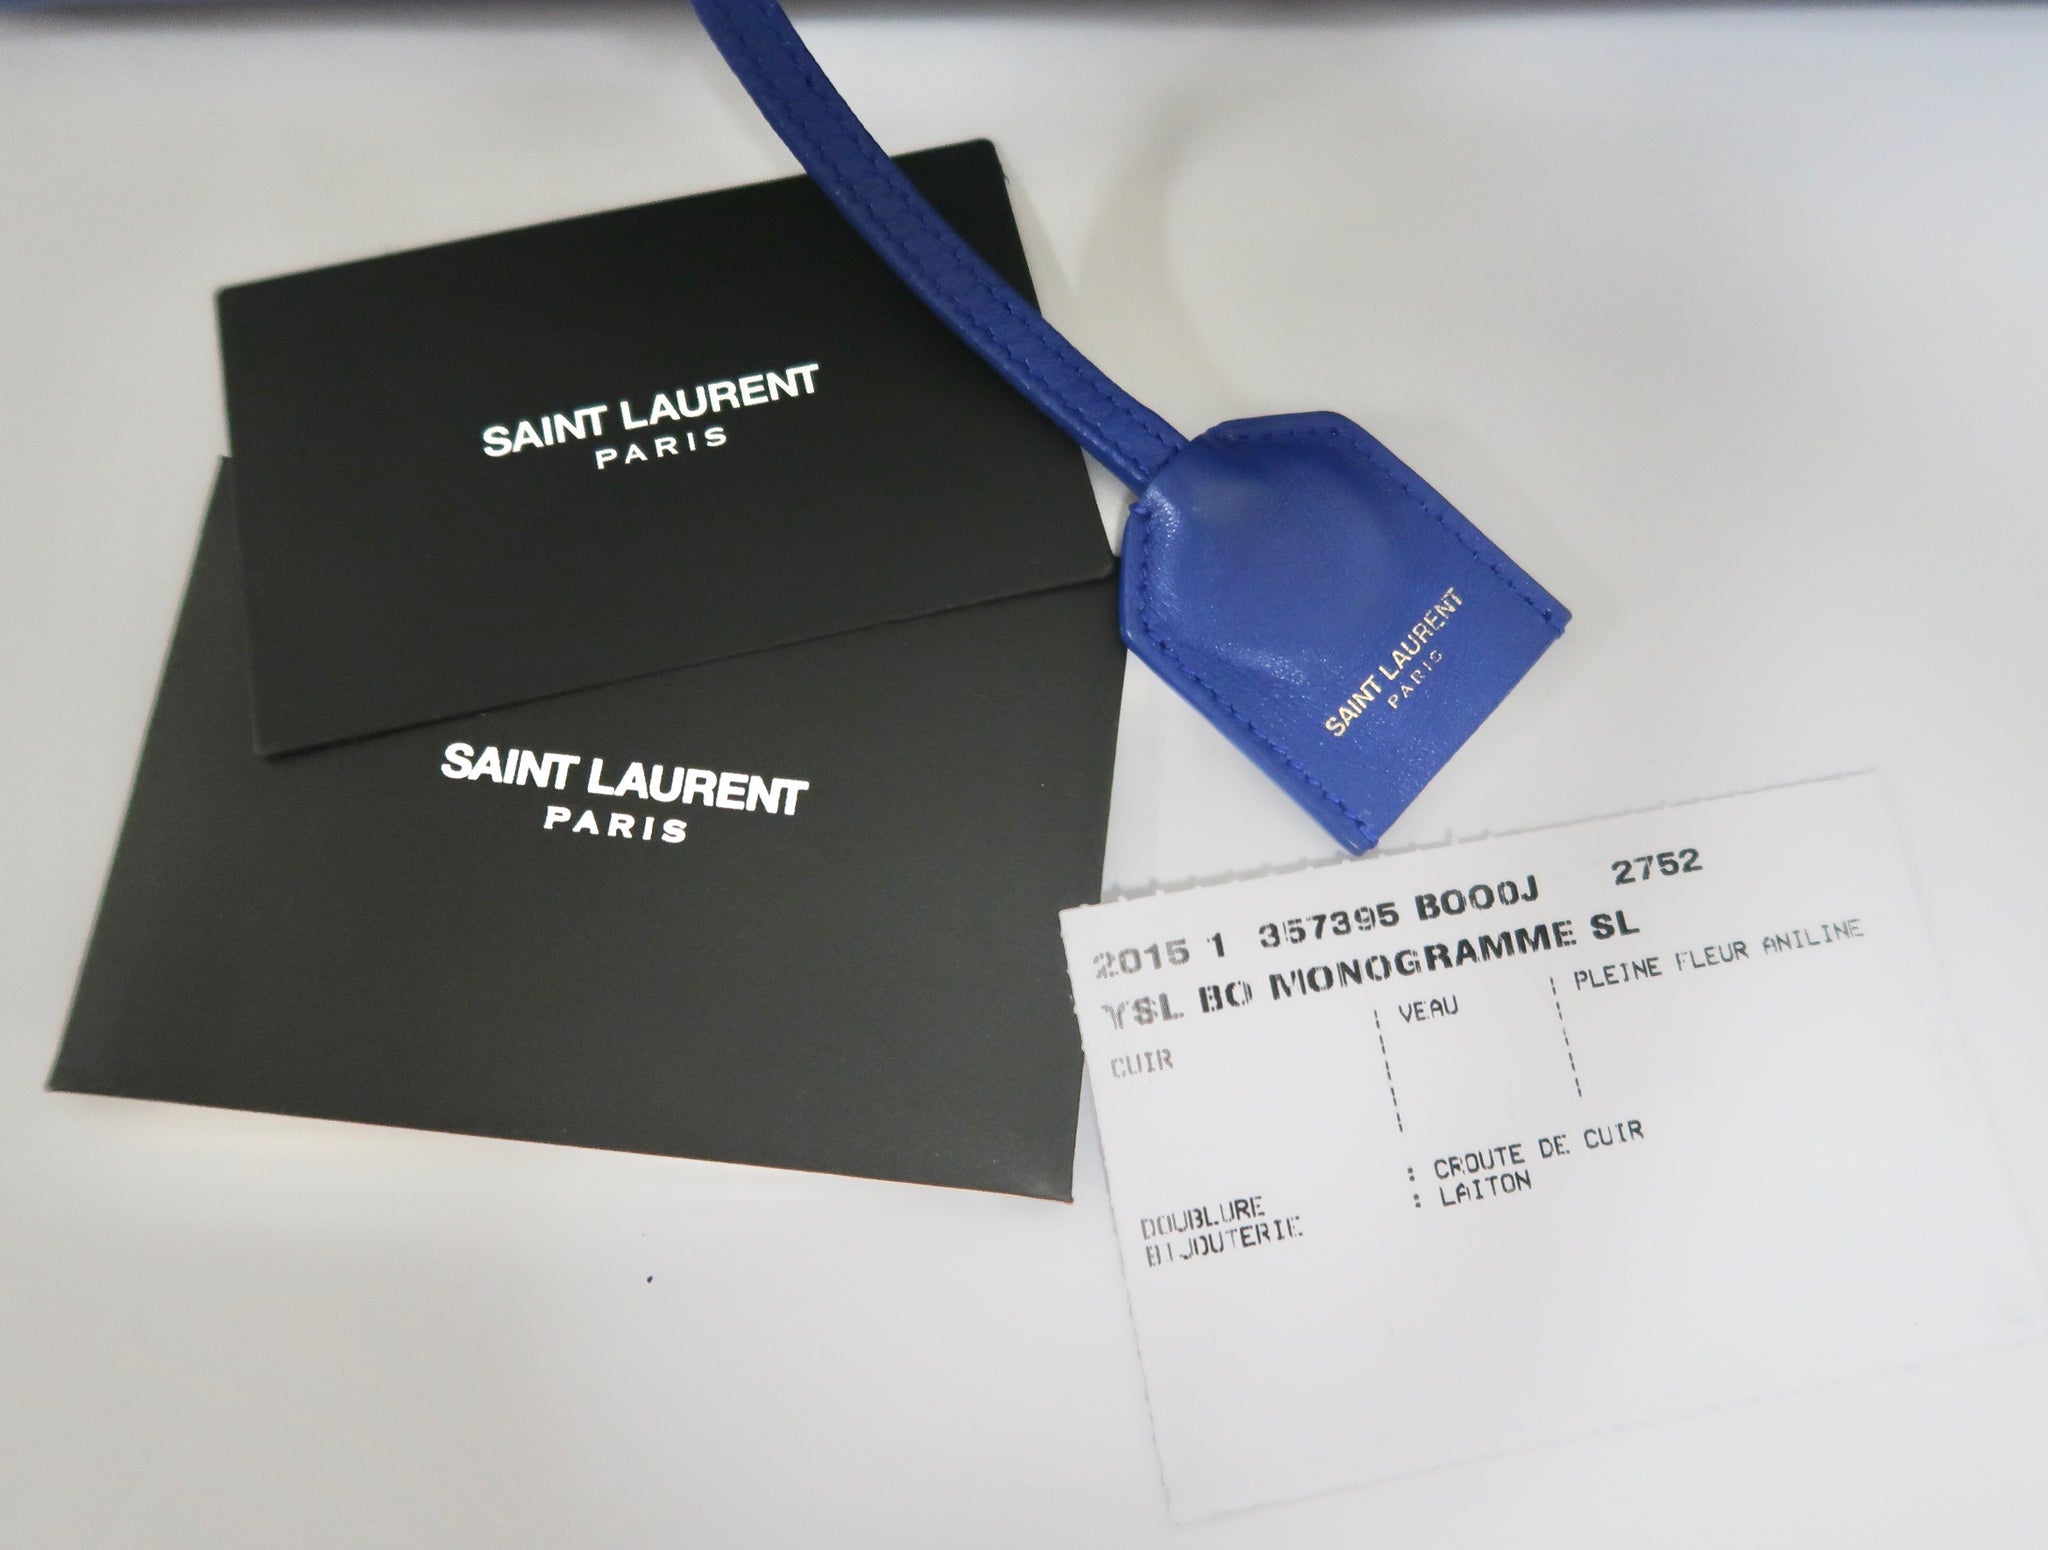 Is this Authentic Yves Saint Laurent?